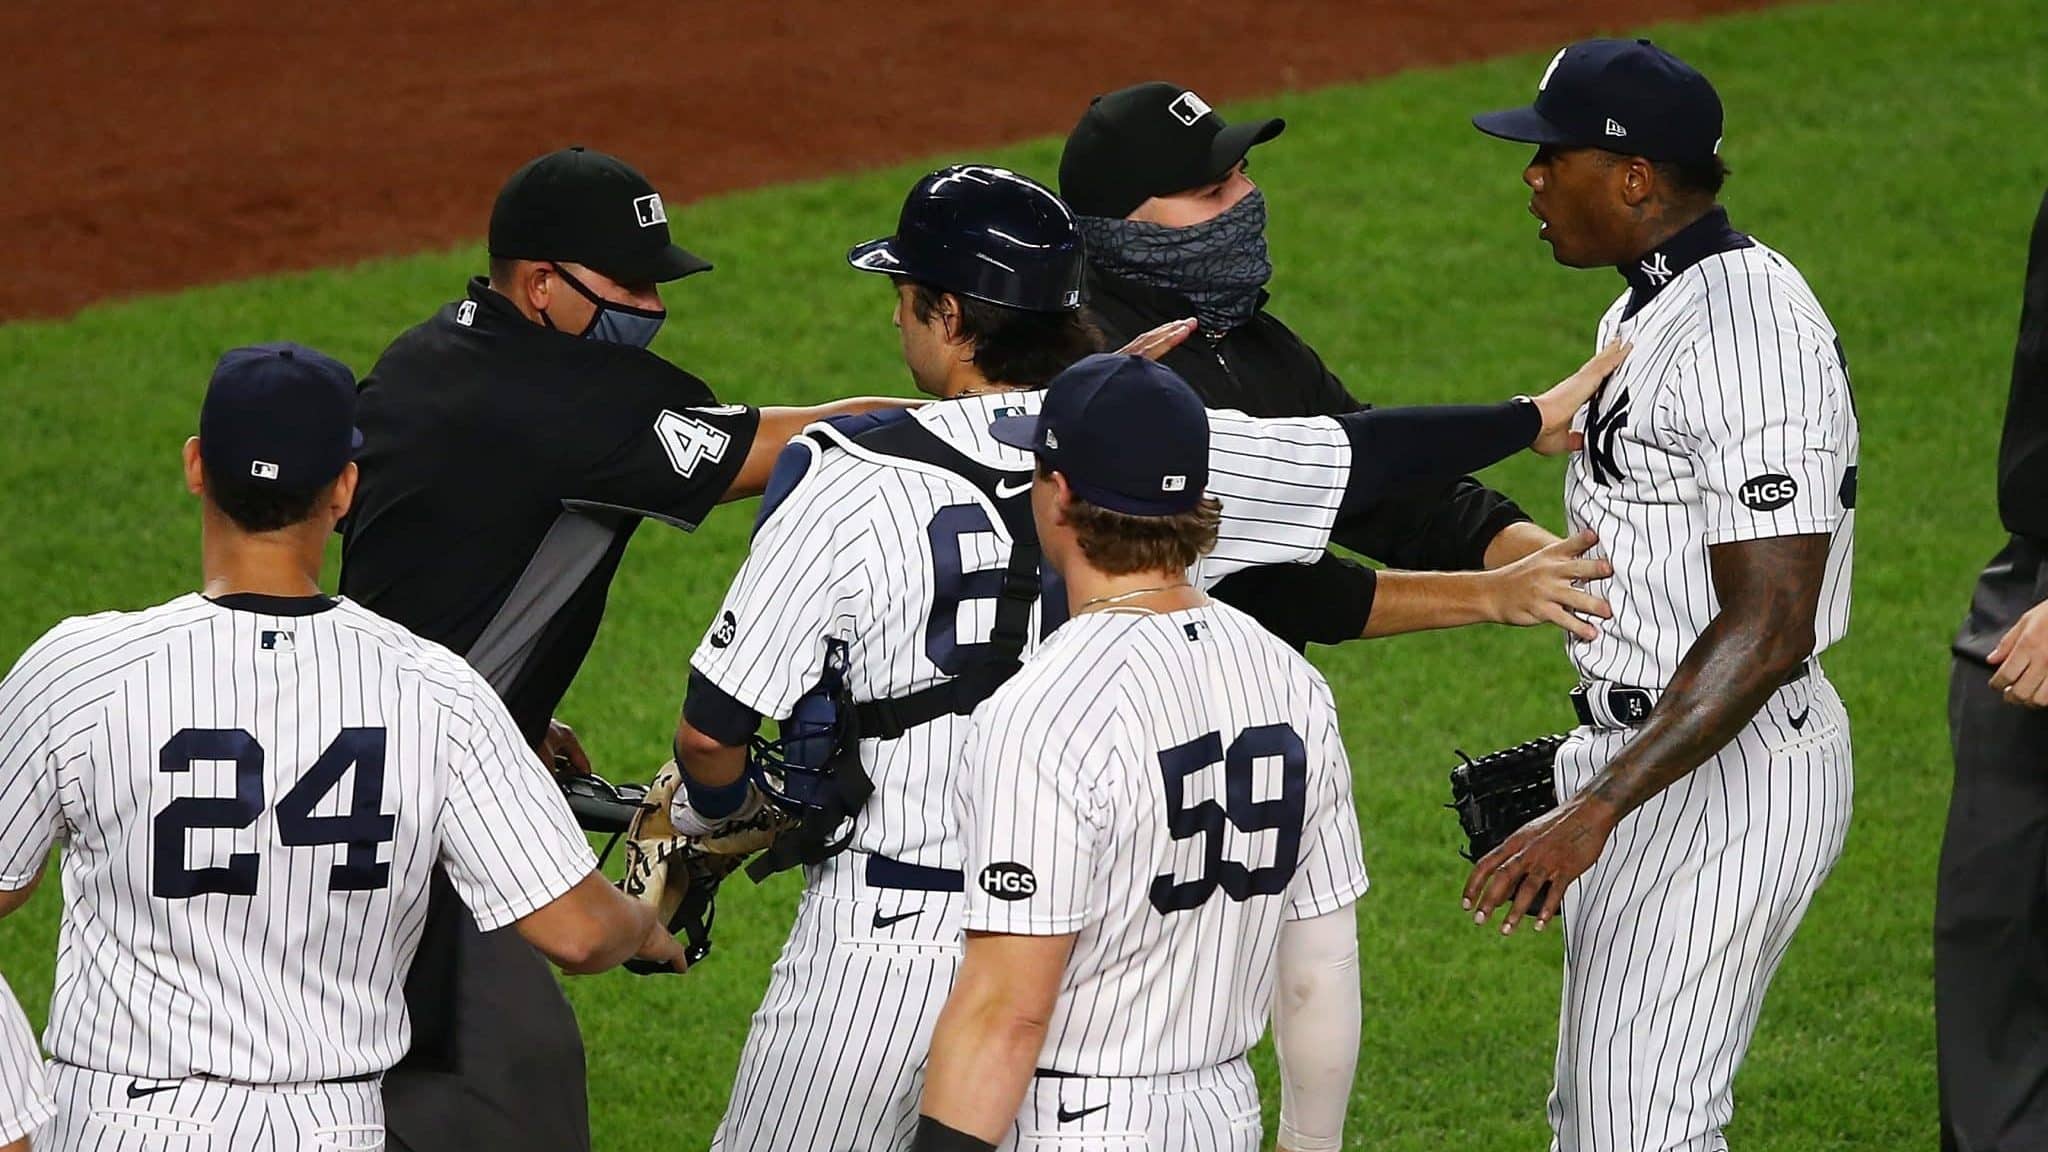 NEW YORK, NEW YORK - SEPTEMBER 01: Aroldis Chapman #54 of the New York Yankees exchanges words with the Tampa Bay Rays after the final out in the ninth inning at Yankee Stadium on September 01, 2020 in New York City.